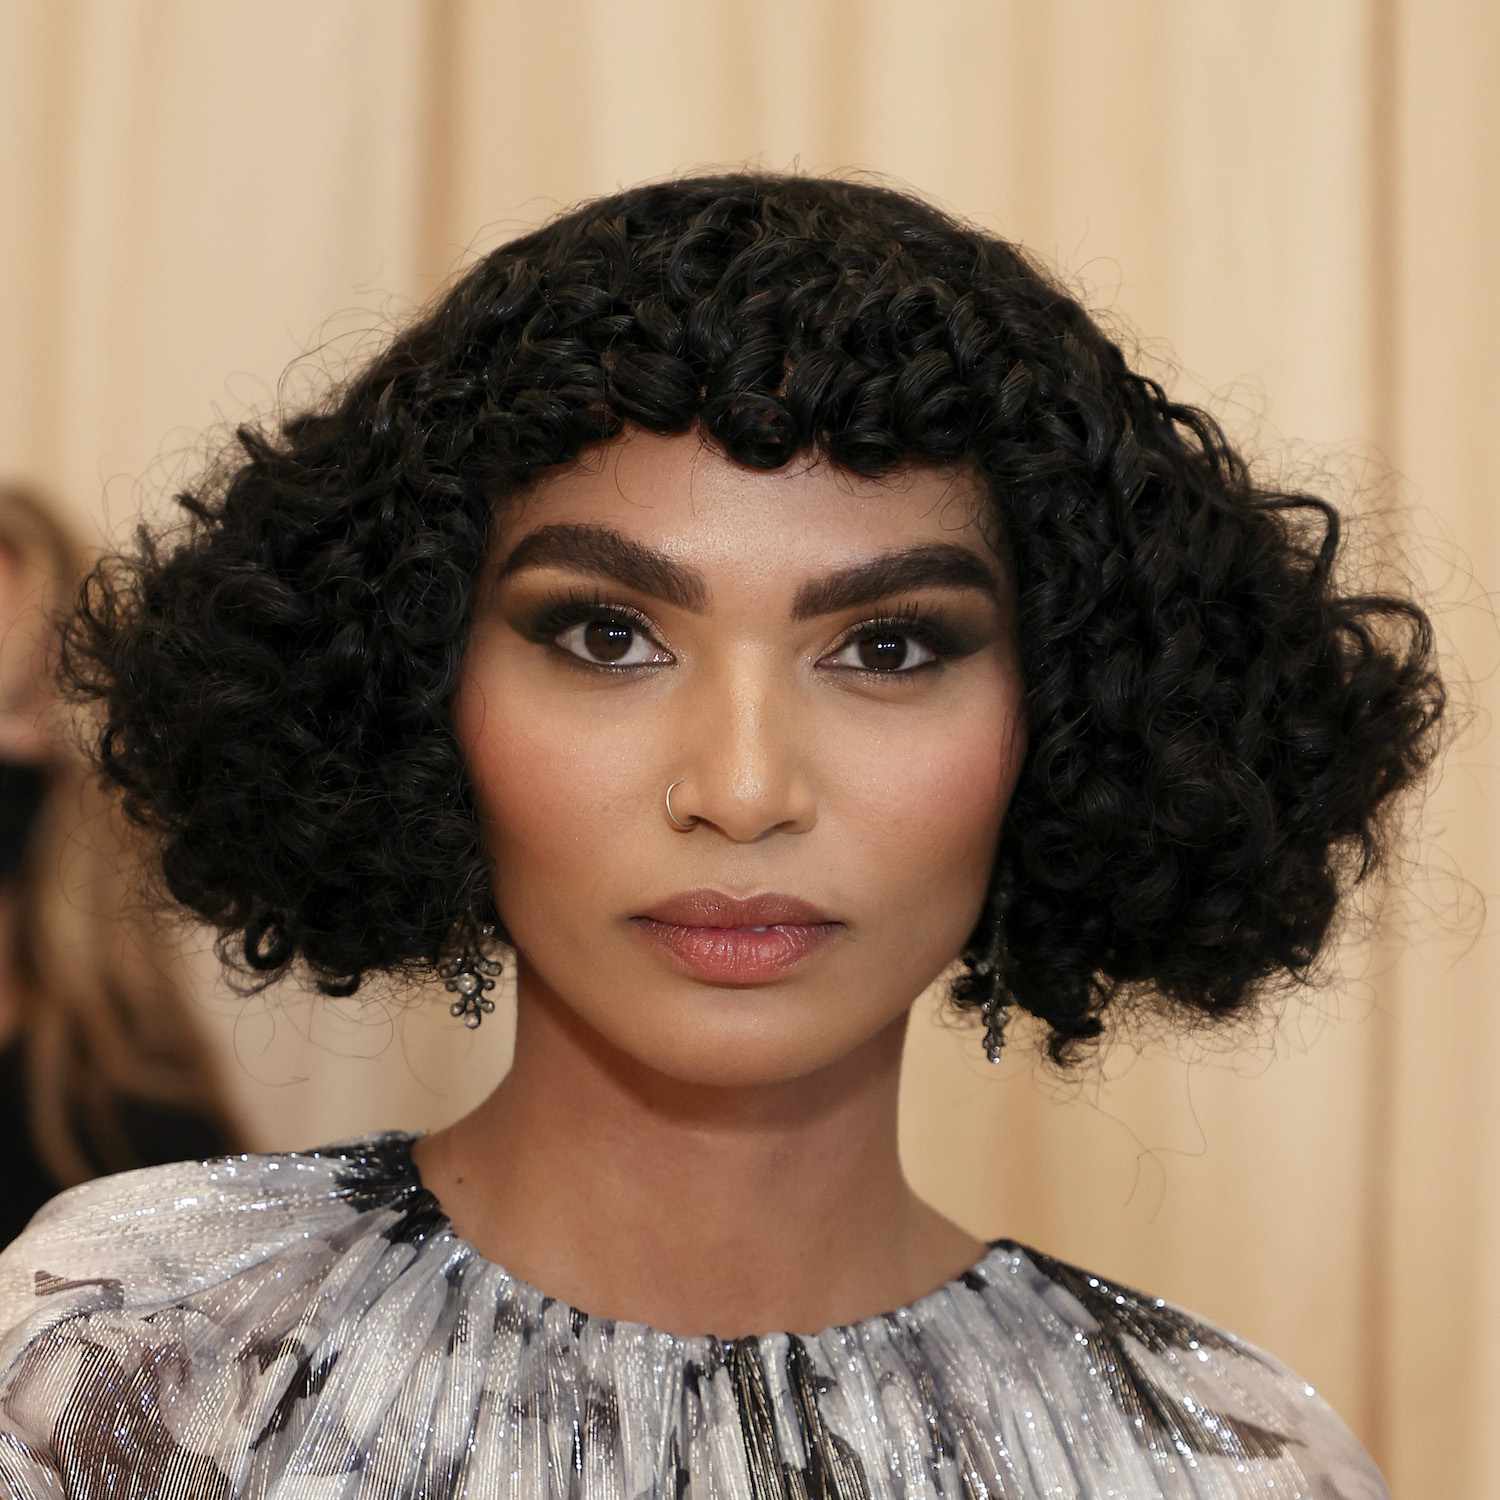 Sophia Roe wears a short curly bob hairstyle with baby bangs